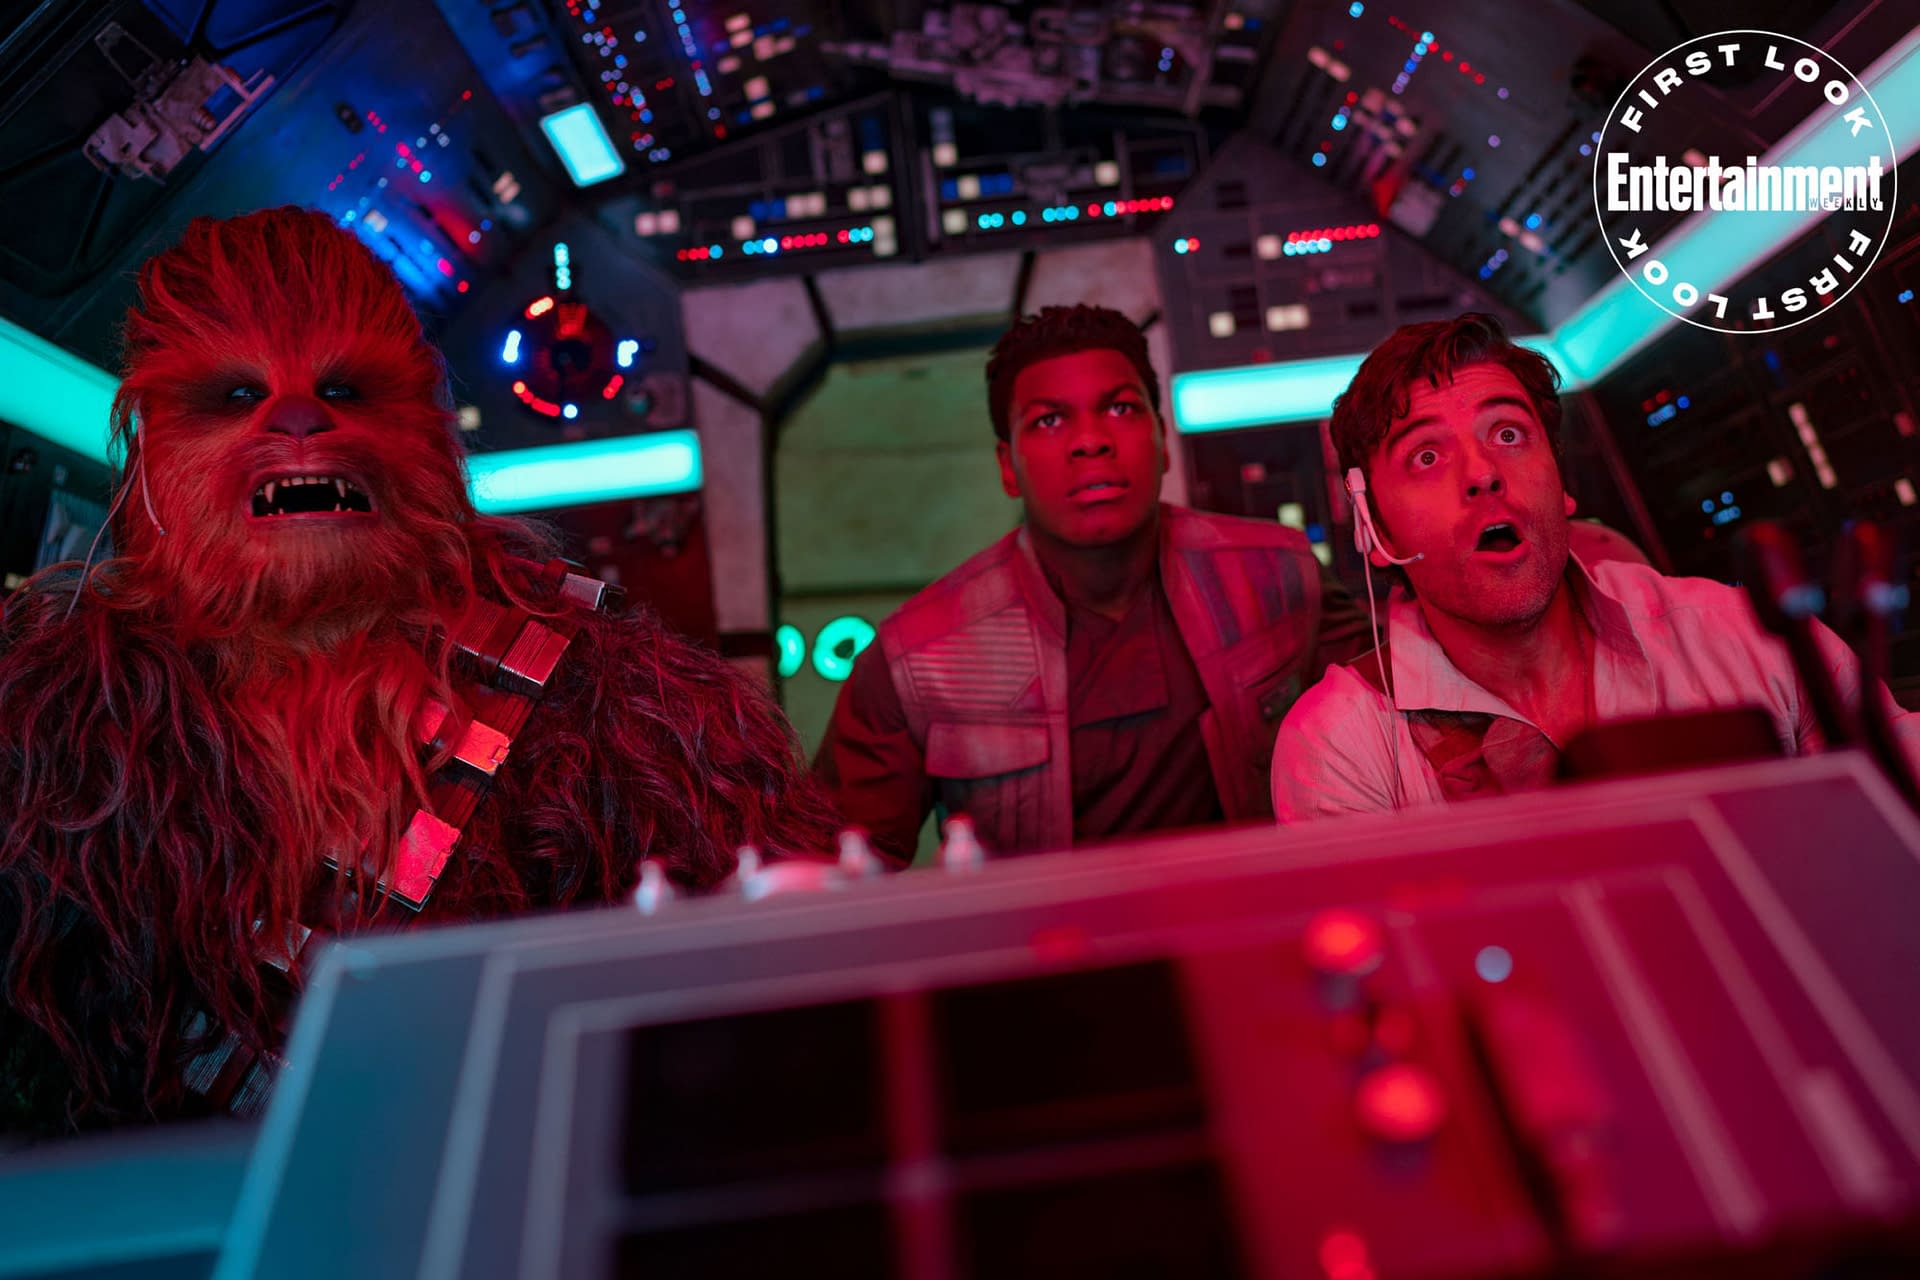 "Star Wars": New Image of Finn, Poe, and Chewie from "The Rise of Skywalker"